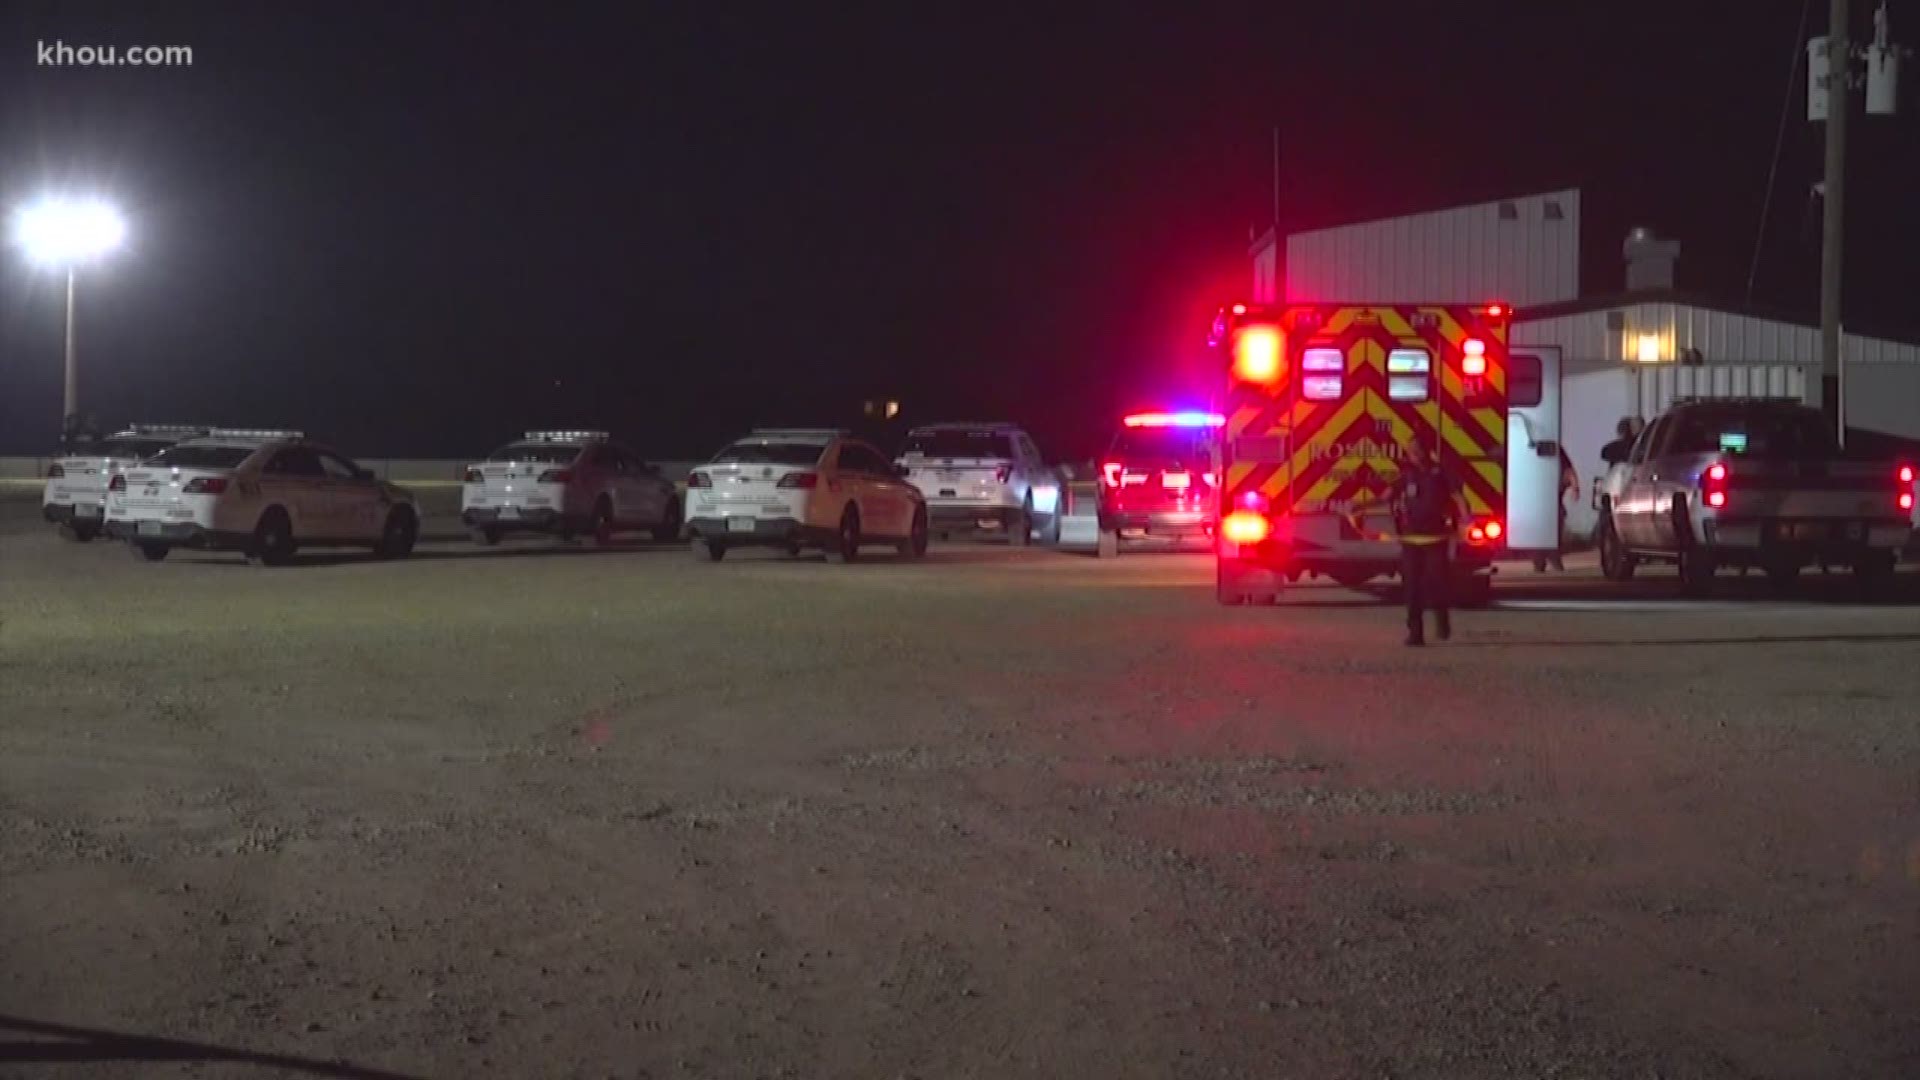 A manager at a drive-in movie theater shot and killed a man who deputies say assaulted her with a baseball bat during an armed robbery overnight.